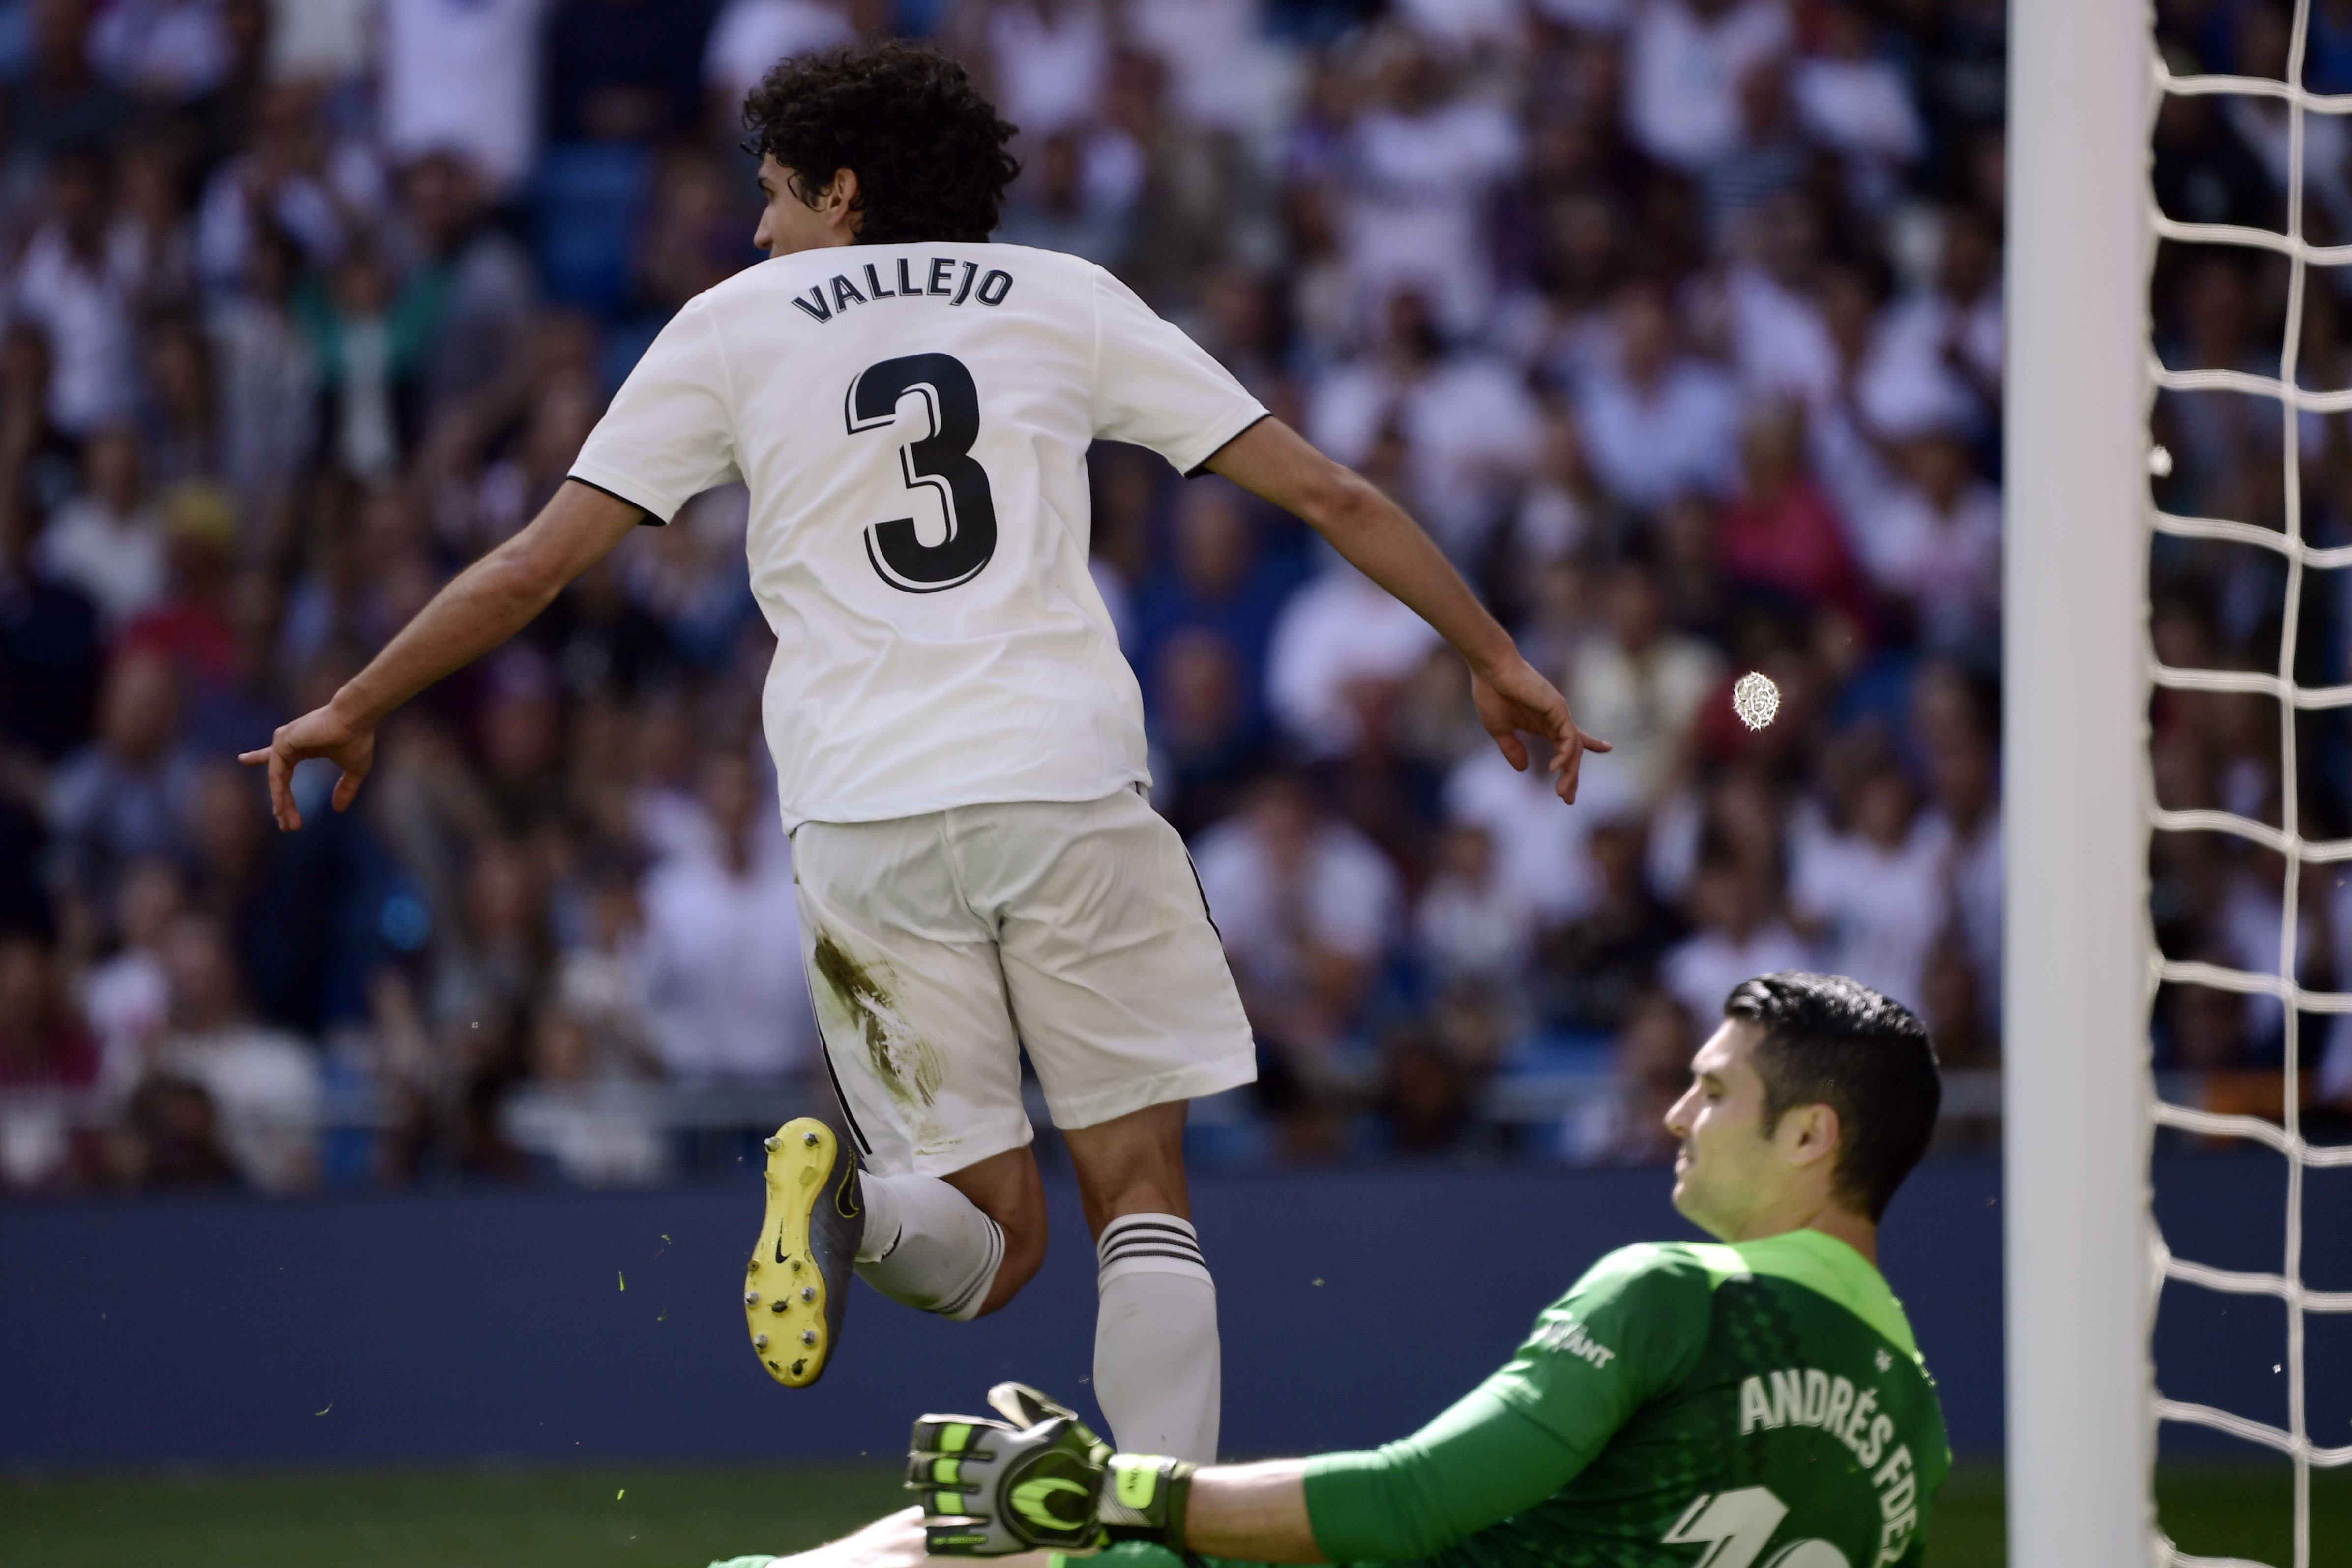 Real Madrid's Spanish defender Jesus Vallejo celebrates his goal during the Spanish league football match between Real Madrid CF and Villarreal CF at the Santiago Bernabeu stadium in Madrid on May 5, 2019. (Photo by JAVIER SORIANO / AFP)        (Photo credit should read JAVIER SORIANO/AFP/Getty Images)